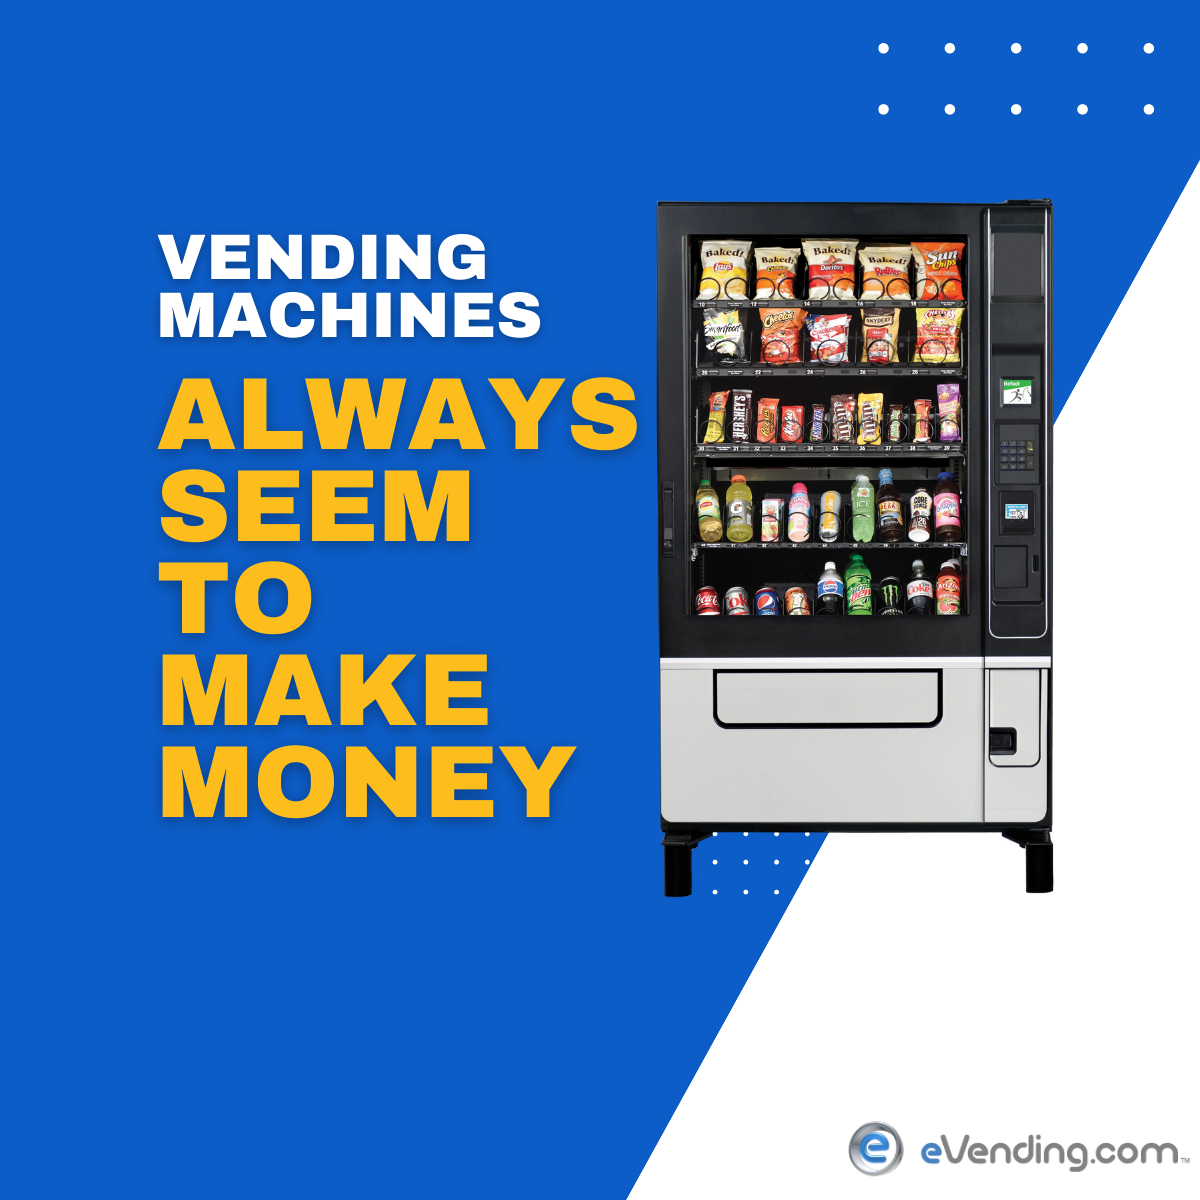 ADD A SNACK MACHINE TO YOUR WAITING AREA